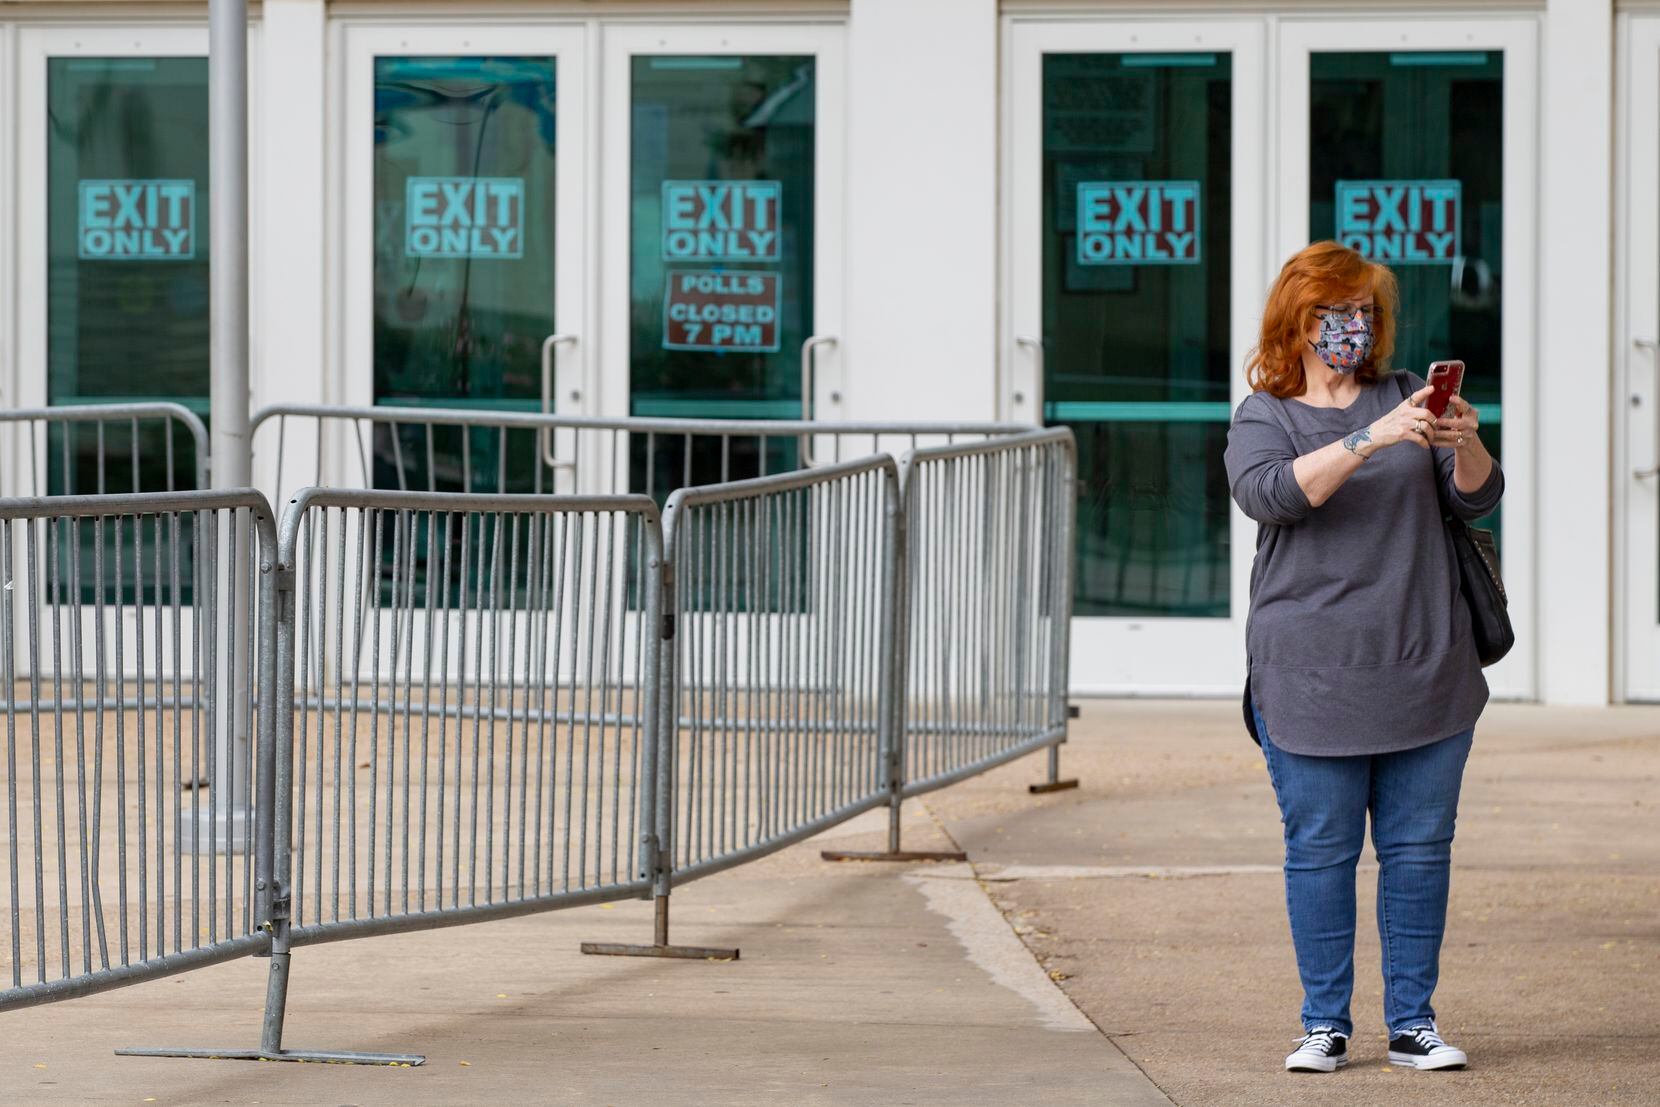 Melissa Warfield takes a selfie after voting at the Allen Event Center in Allen on Thursday, Oct. 29, 2020. (Juan Figueroa/ The Dallas Morning News)